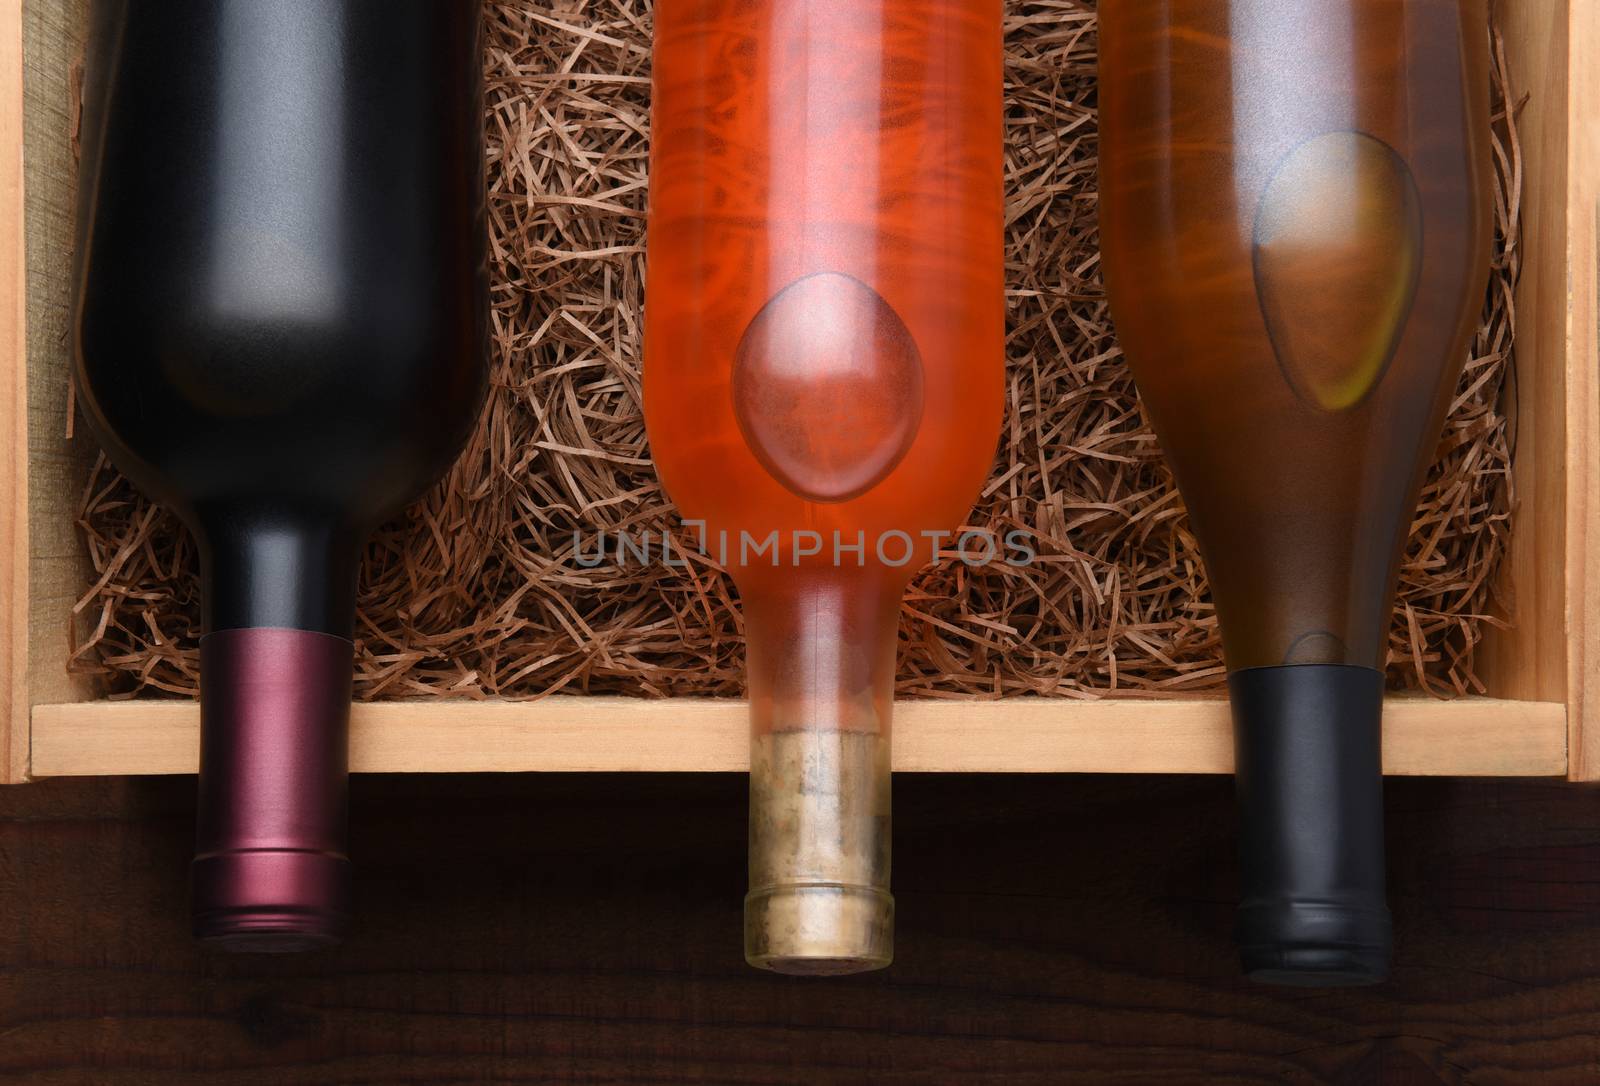 Three Wine Bottles: Bottles of Cabernet, Blush and Chardonnay wine in a wood case with packing straw.